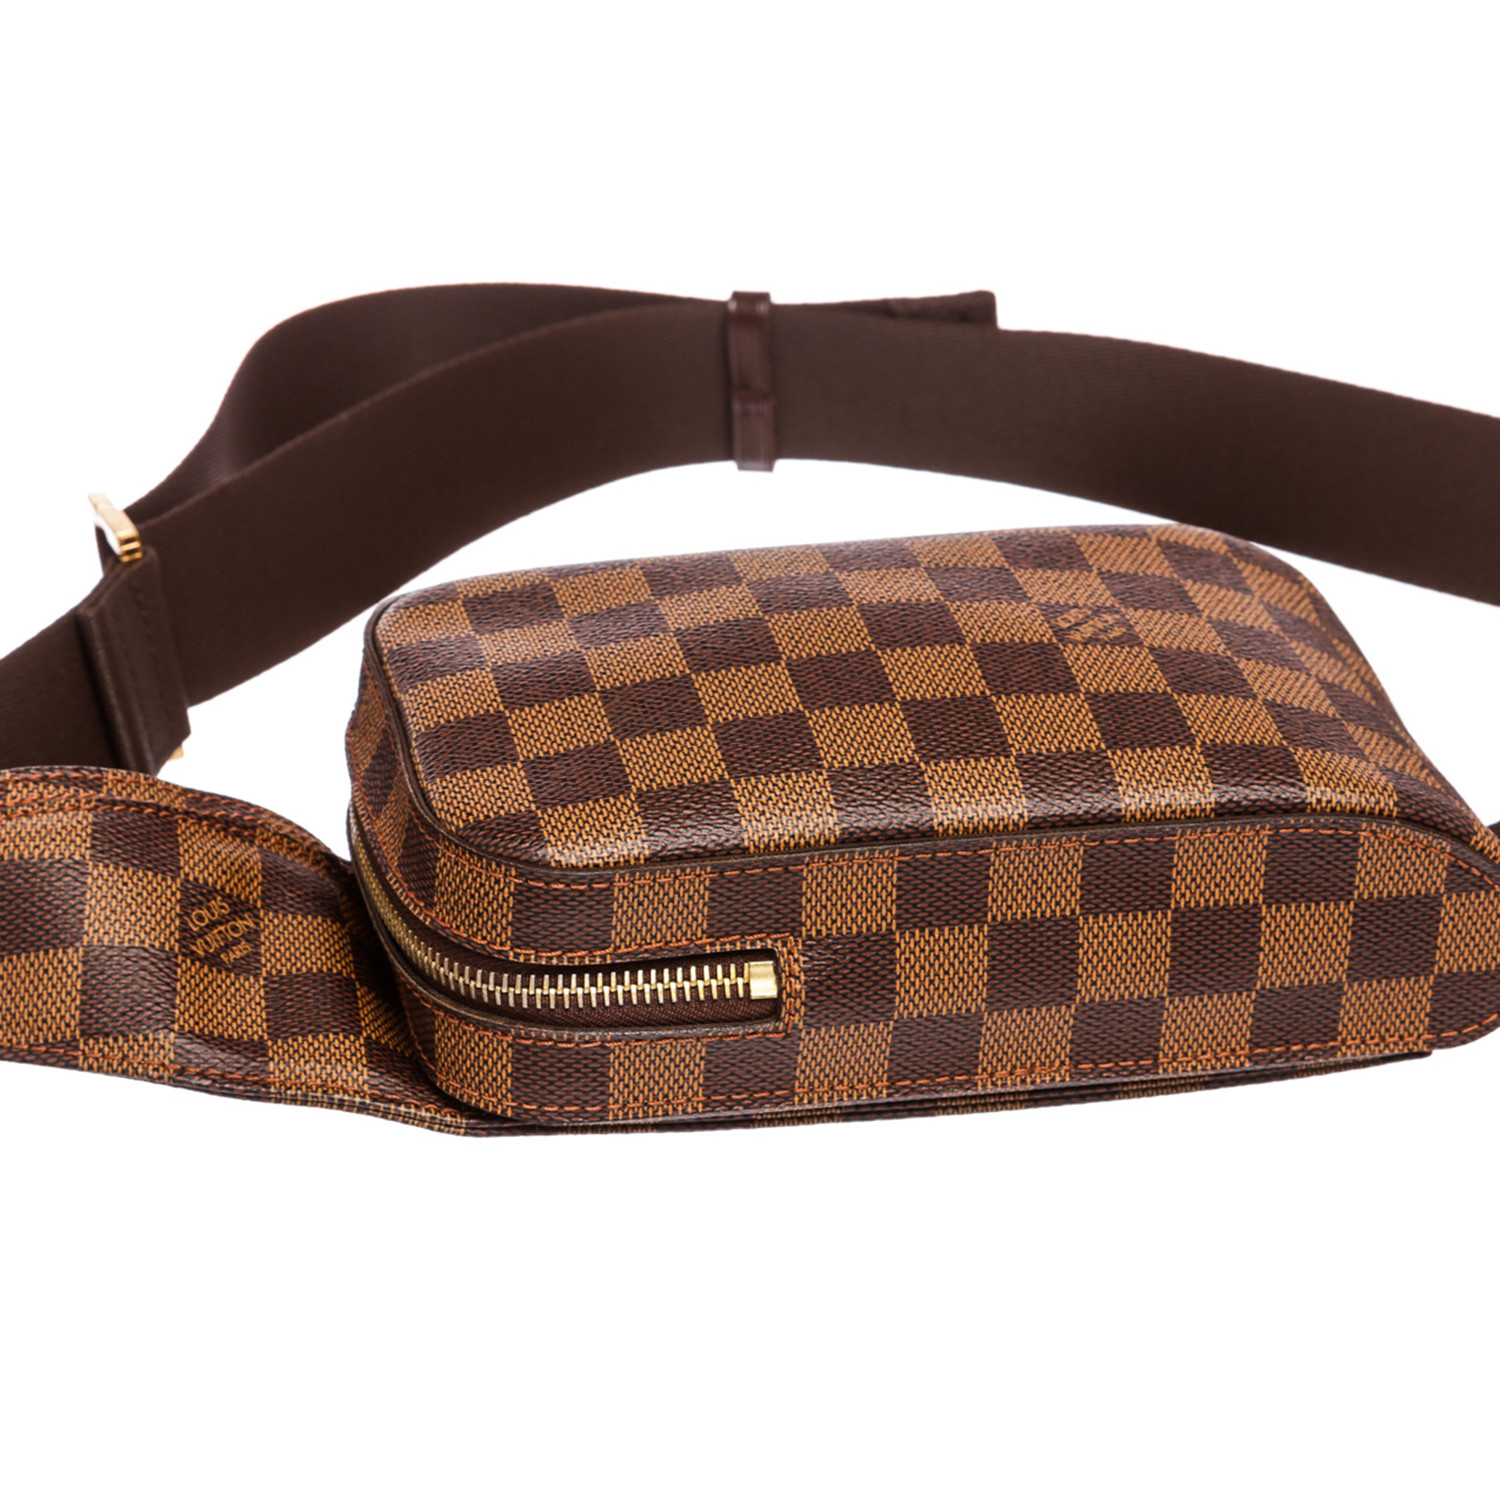 Geronimos Bag // CA0045 // Pre-Owned - Louis Vuitton - Touch of Modern